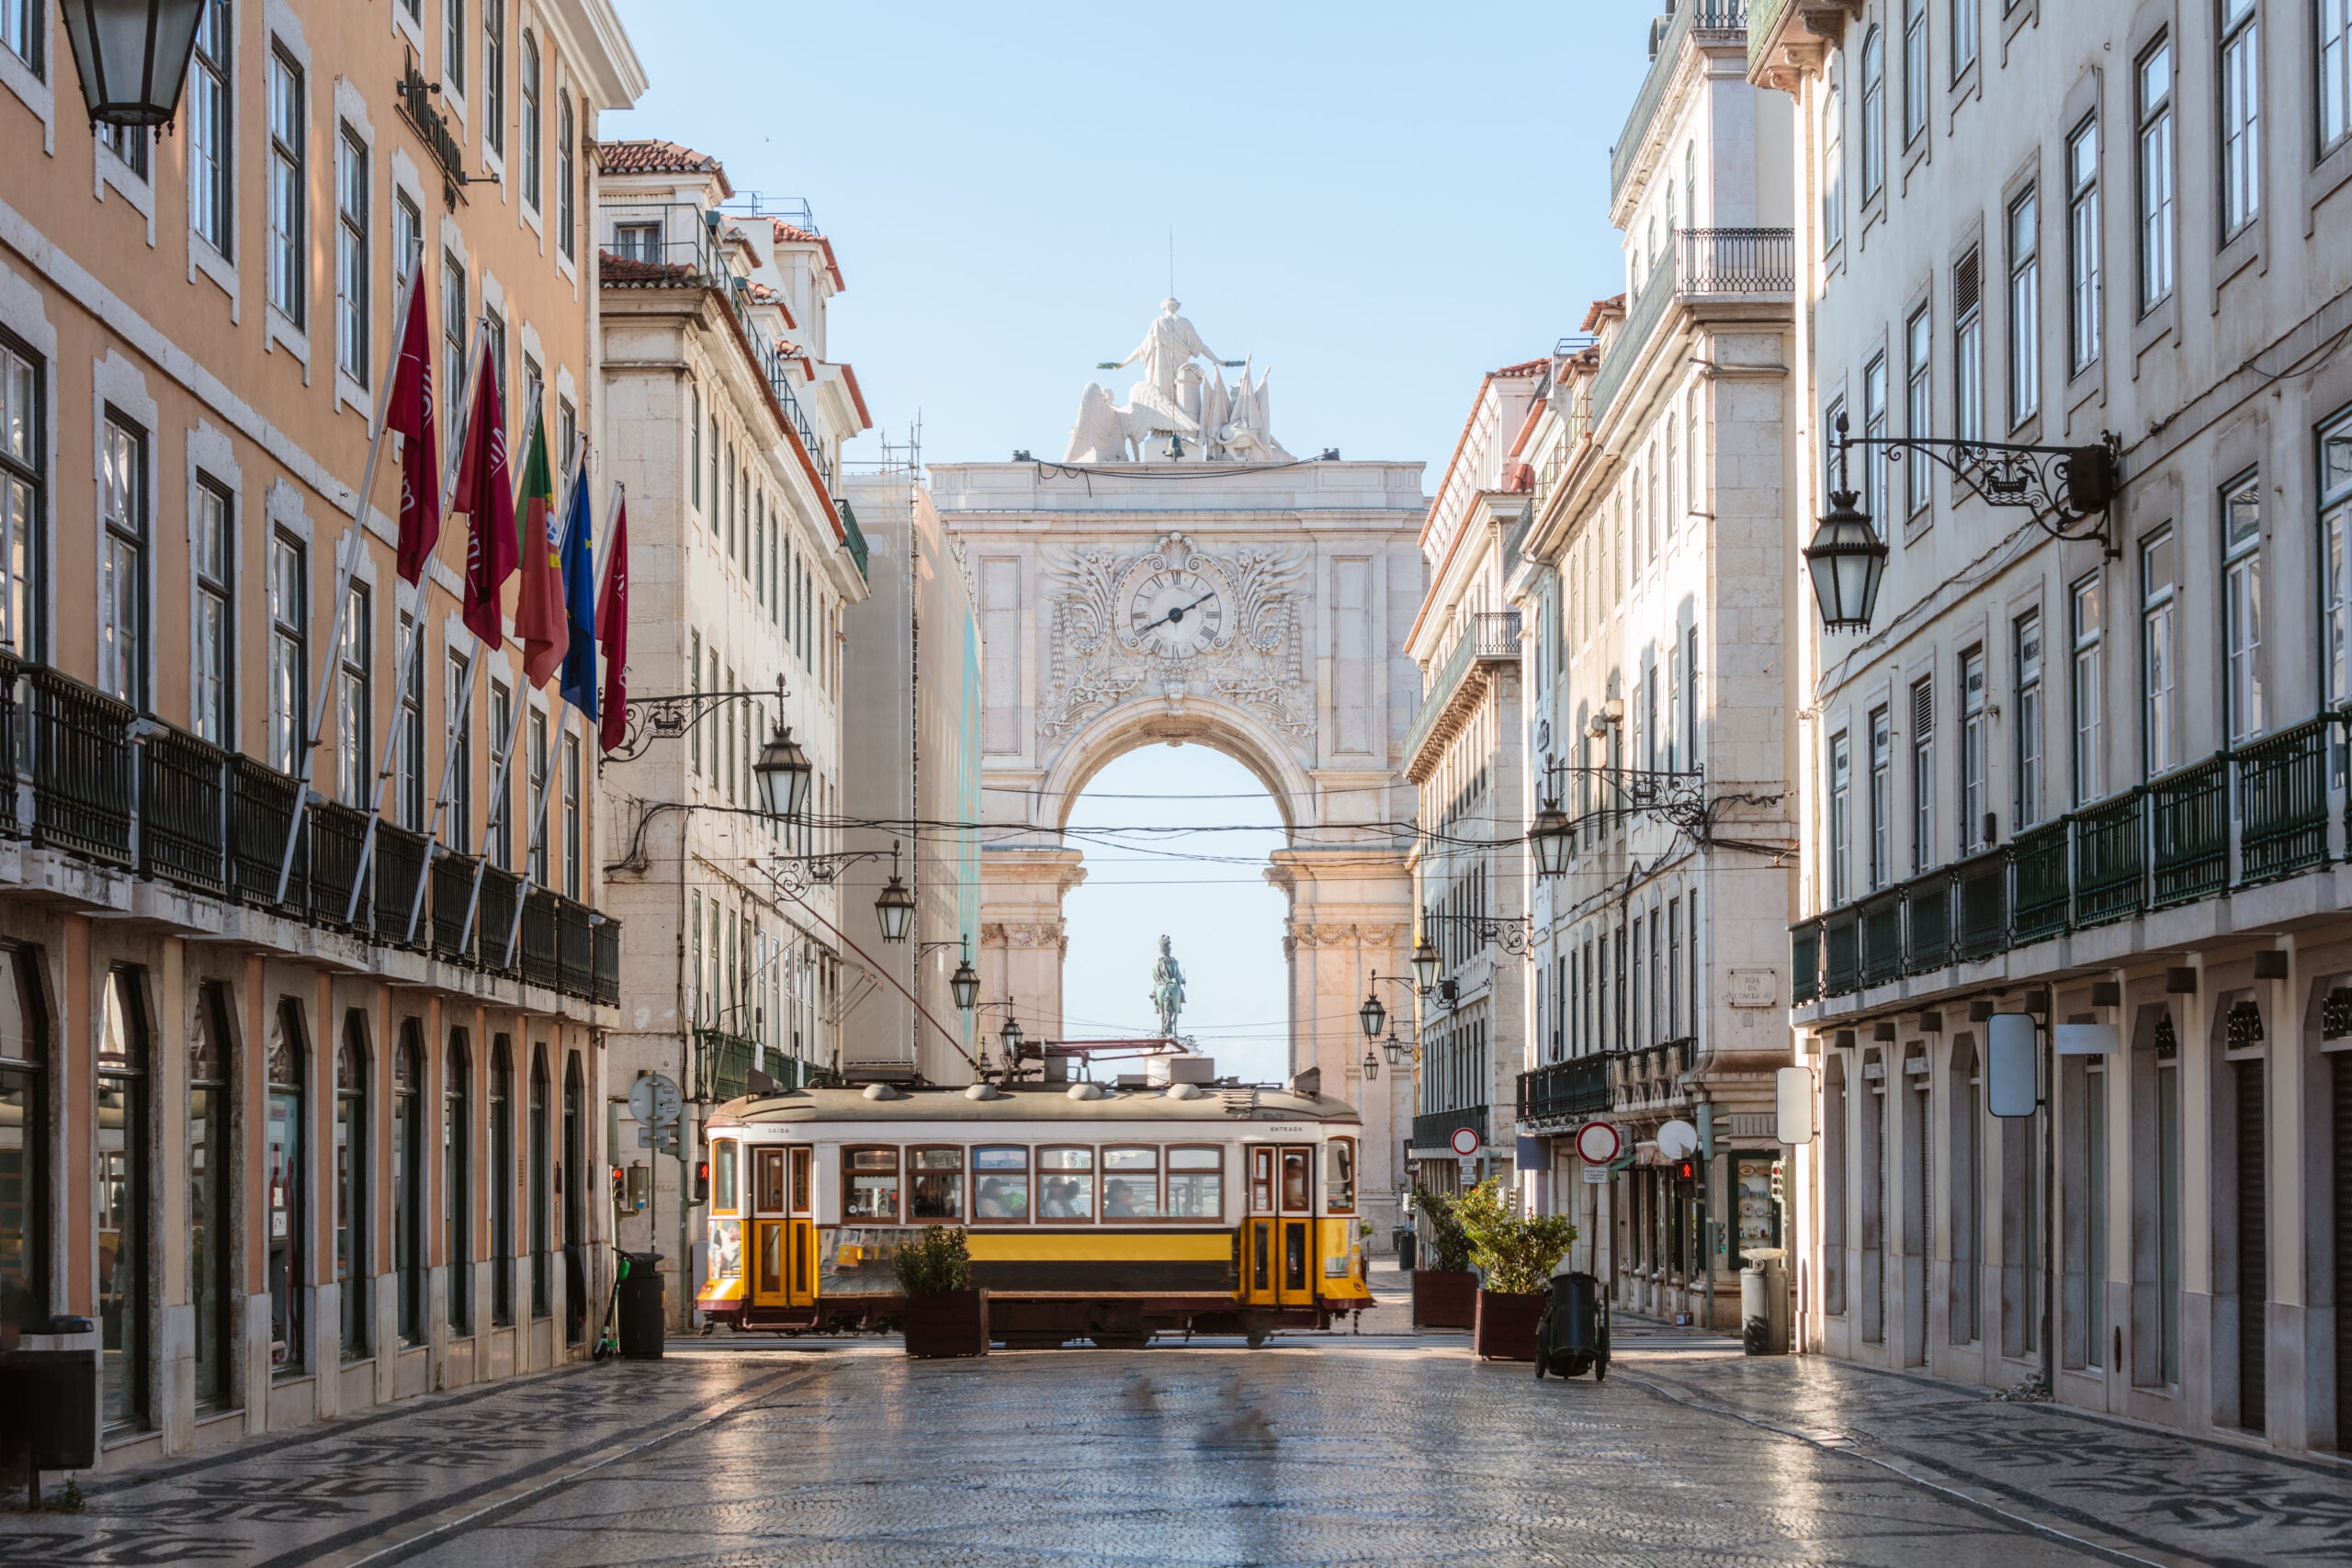 Portugal could end its popular Golden Visa program — here's how to get it before it's gone